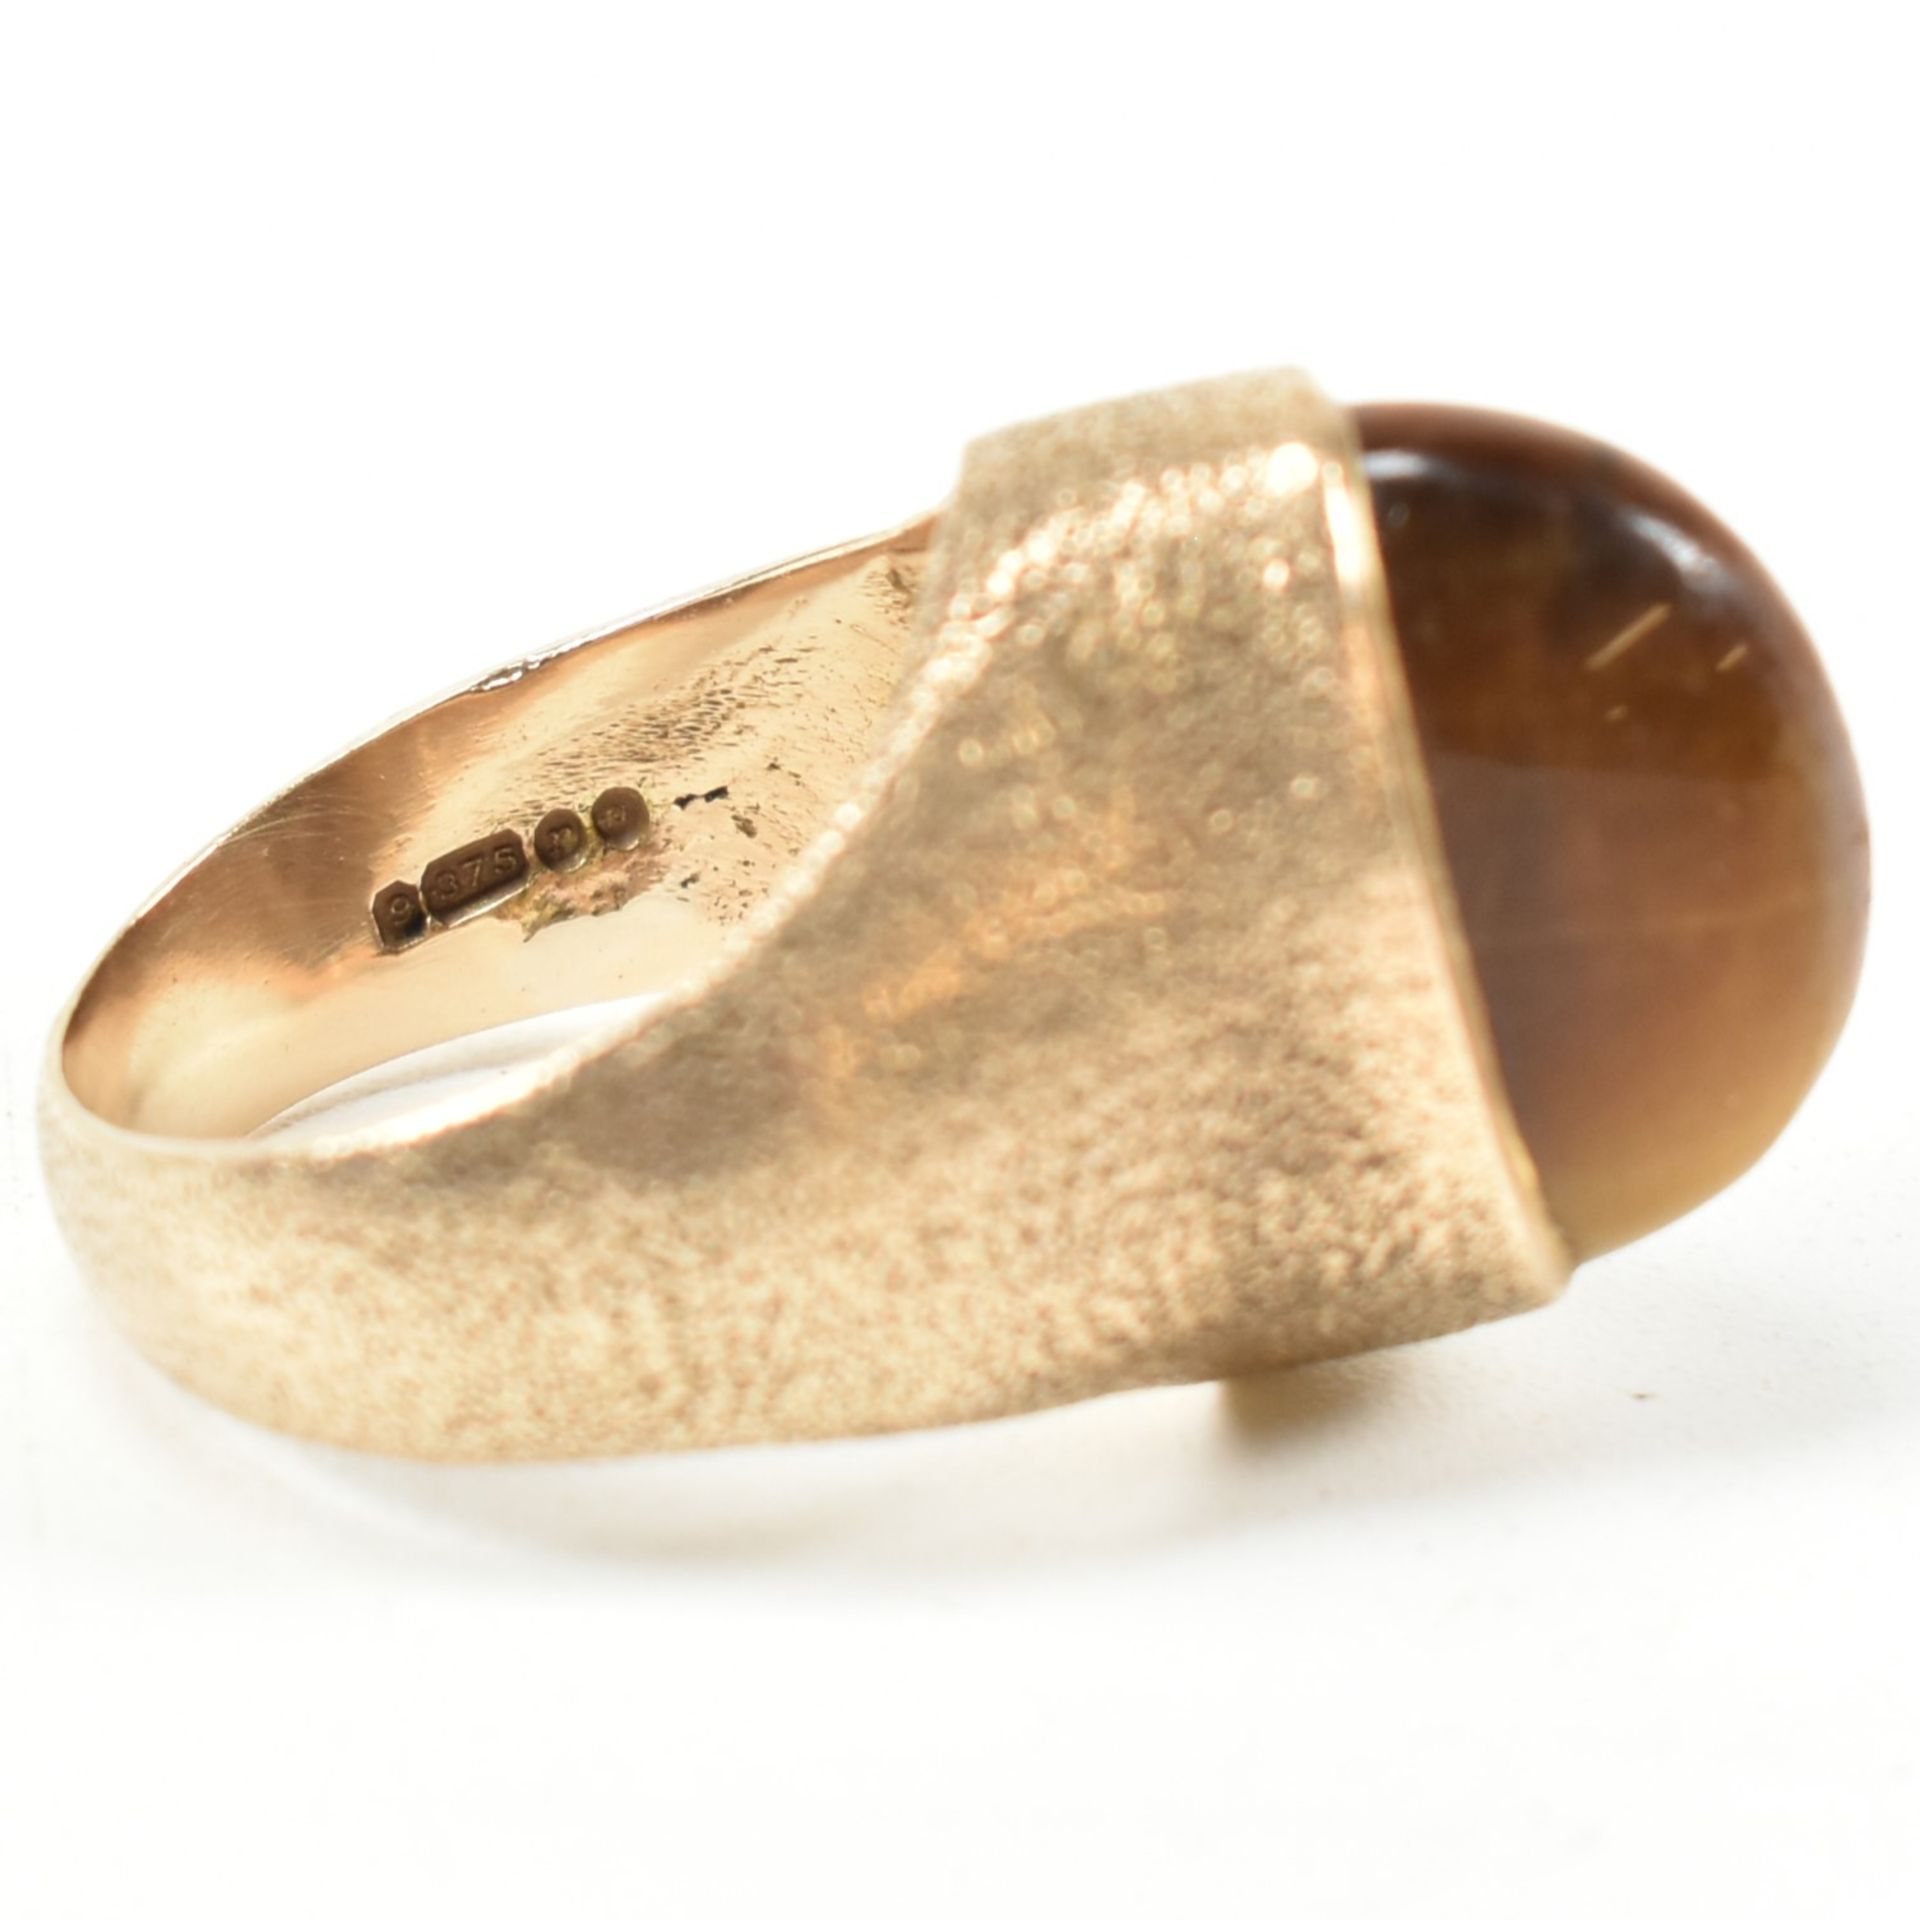 MODERNIST HALLMARKED 9CT GOLD & TIGERS EYE RING - Image 6 of 8